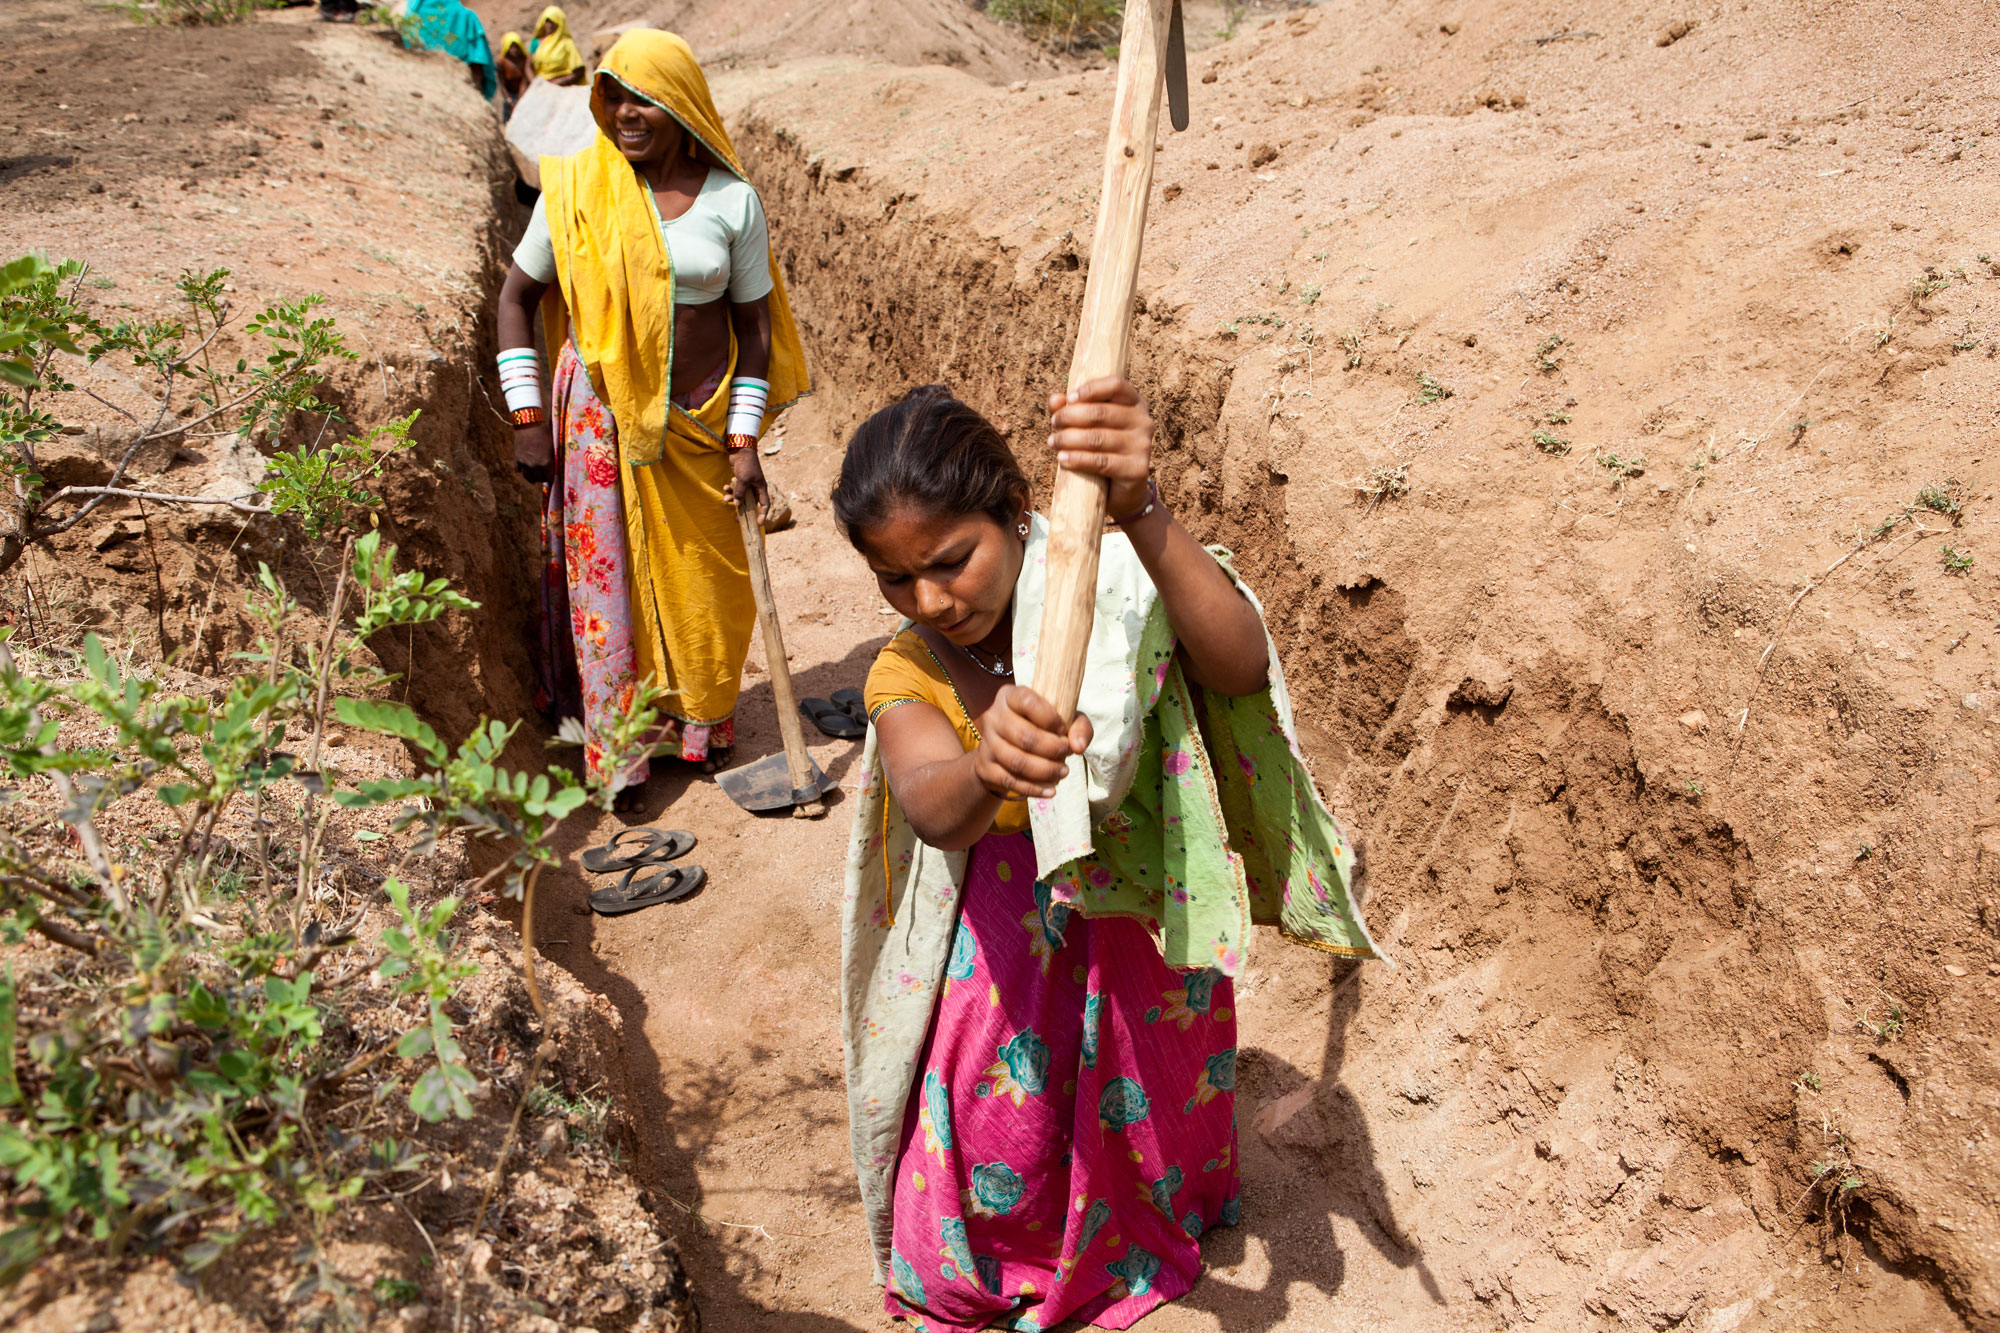 Rural Indian women working on the land-picture courtesy-CAnderson